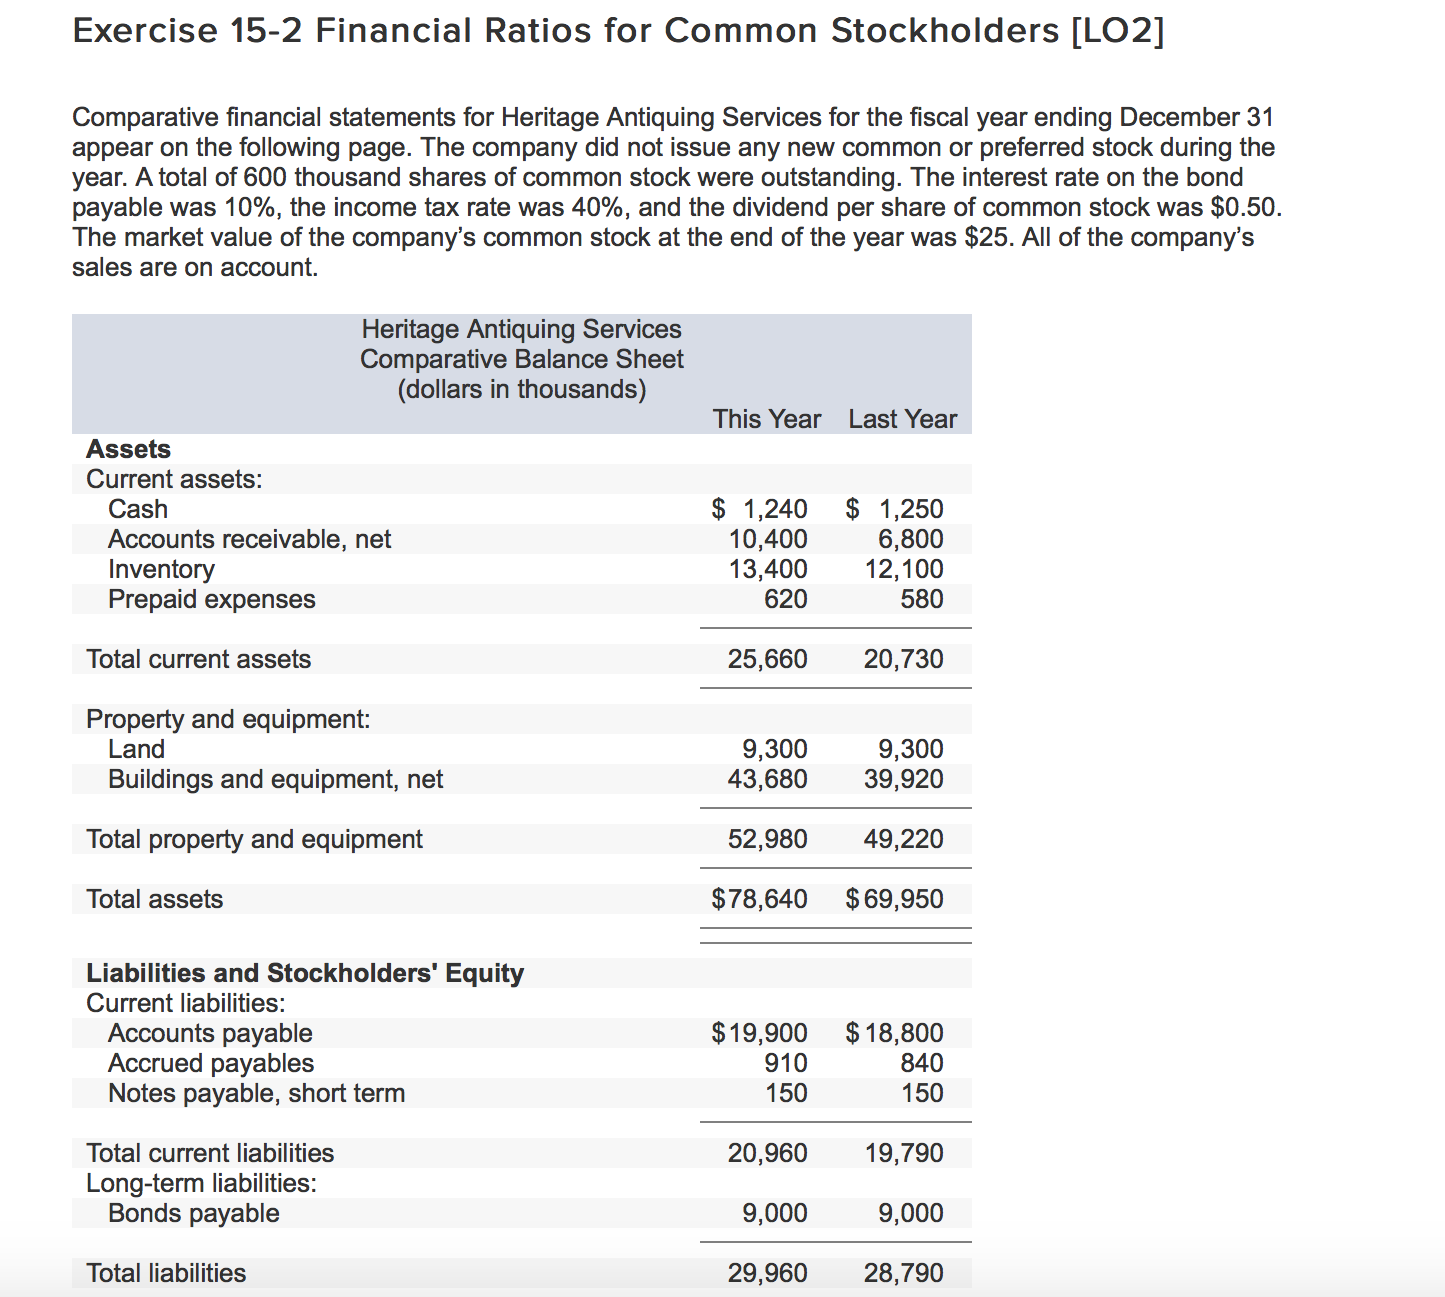 Exercise 15-2 financial ratios for common stockholders [lo2] comparative financial statements for heritage antiquing services for the fiscal year ending december 31 appear on the following page. the company did not issue any new common or preferred stock during the year. a total of 600 thousand shares of common stock were outstanding. the interest rate on the bond payable was 10%, the income tax rate was 40%, and the dividend per share of common stock was $0.50. the market value of the companys common stock at the end of the year was $25. all of the companys sales are on account. heritage antiquing services comparative balance sheet dollars in thousands) this year last year assets current assets: cash accounts receivable, net inventory prepaid expenses $ 1,240 $ 1,250 6,800 12,100 580 10,400 13,400 620 total current assets 25,66020,730 property and equipment: 9,300 9,300 buildings and equipment, net total property and equipment total assets 43,680 39,920 52,98049,220 $78,640 $69,950 liabilities and stockholders equity current liabilities: accounts payable accrued payables notes payable, short term $19,900 $18,800 840 150 910 150 20,960 9,000 19,790 9,000 29,96028,790 total current liabilities long-term liabilities: bonds payable total liabilities